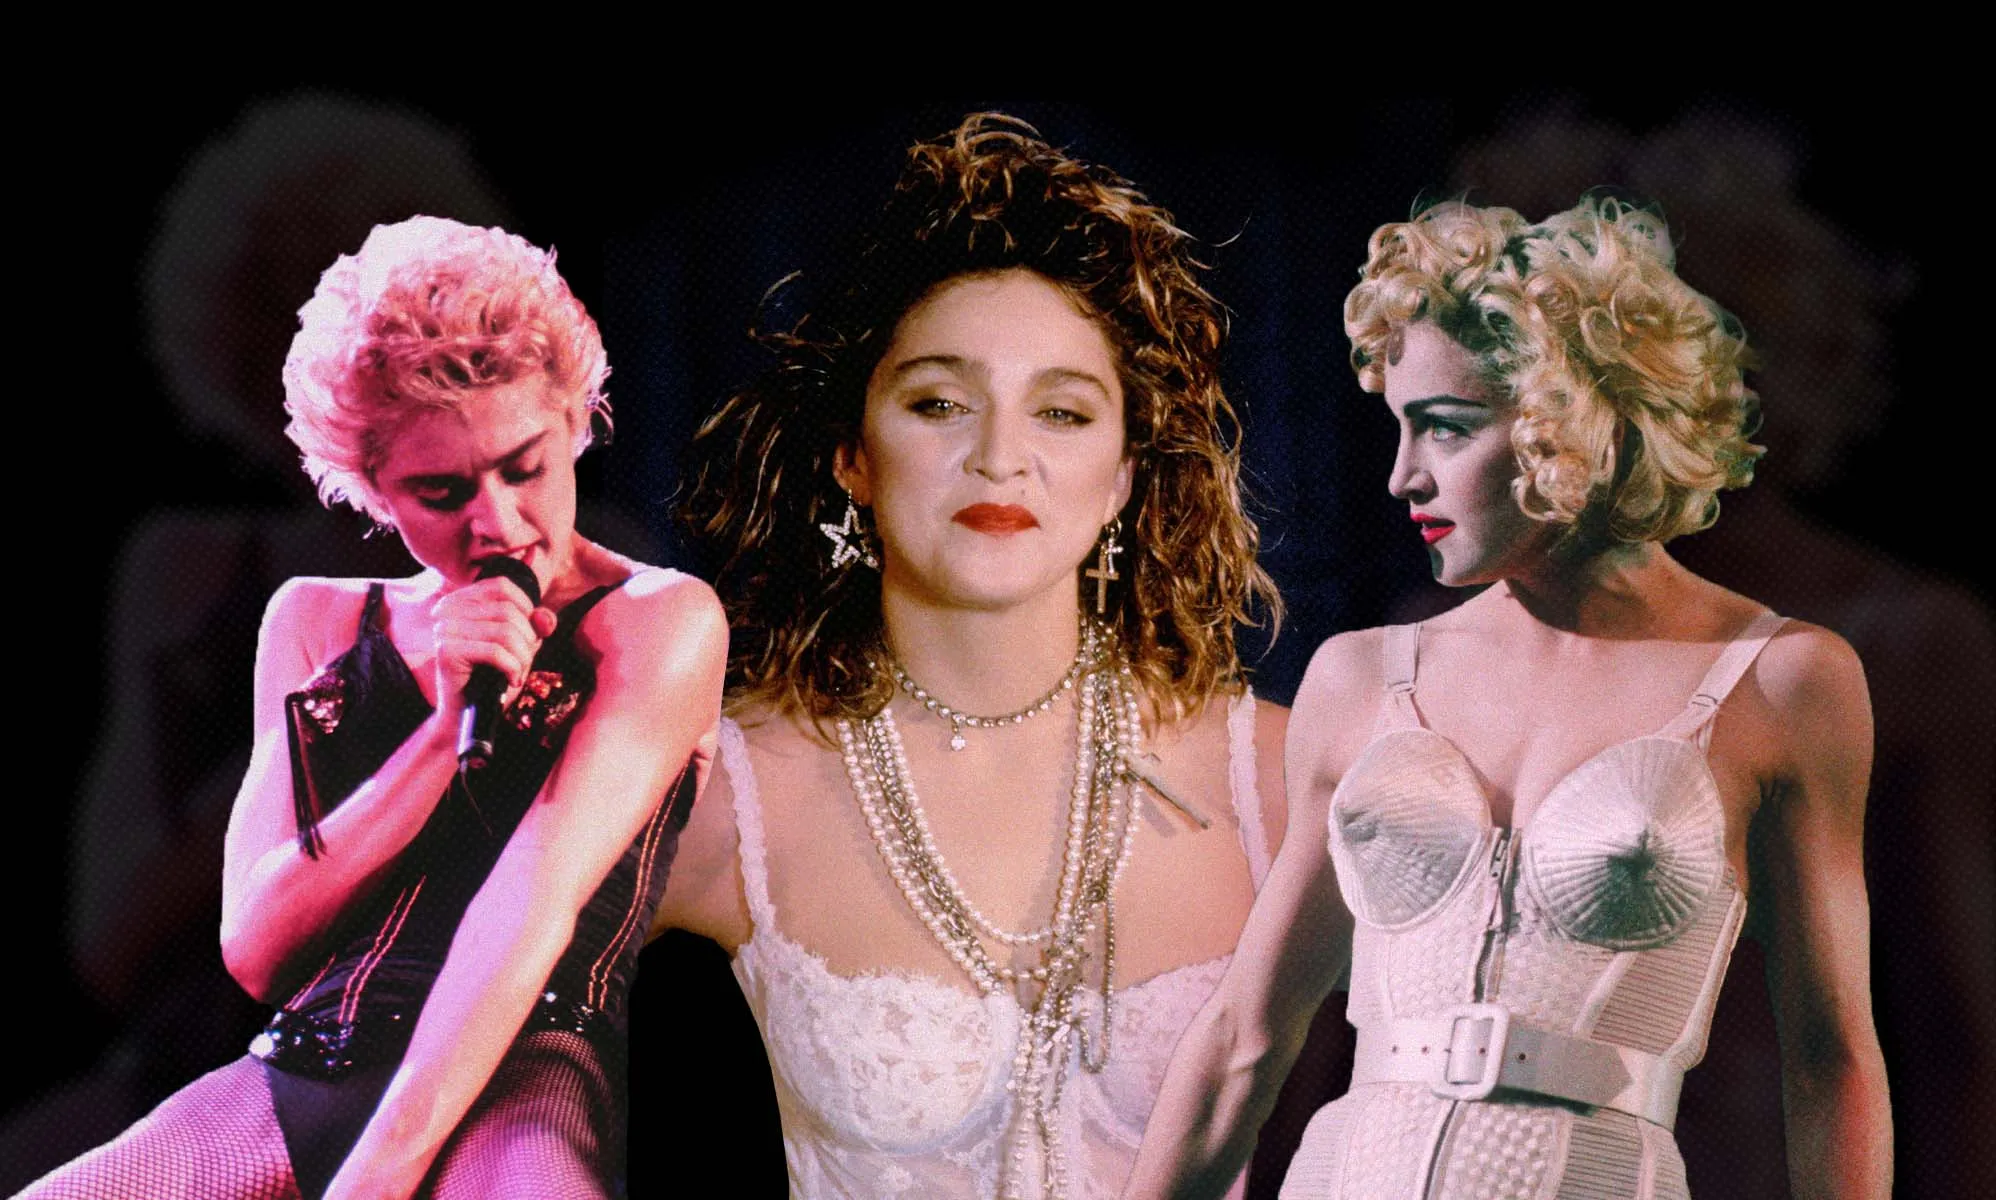 Madonna fans reflect on how she taught LGBTQ people they matter